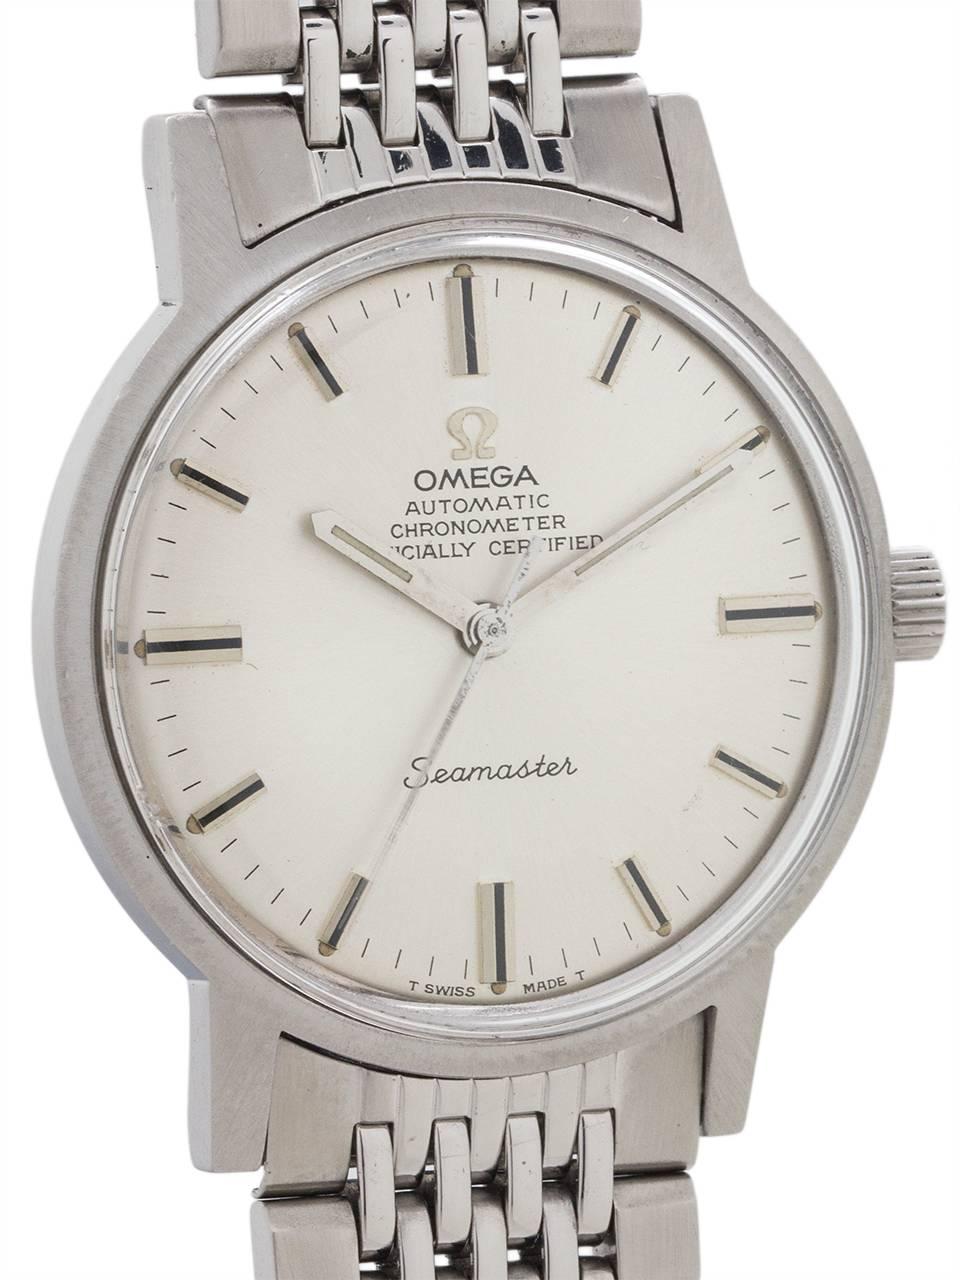 Aesthetic Movement Omega Stainless Steel Chronometer Certified Seamaster Wristwatch, circa 1968